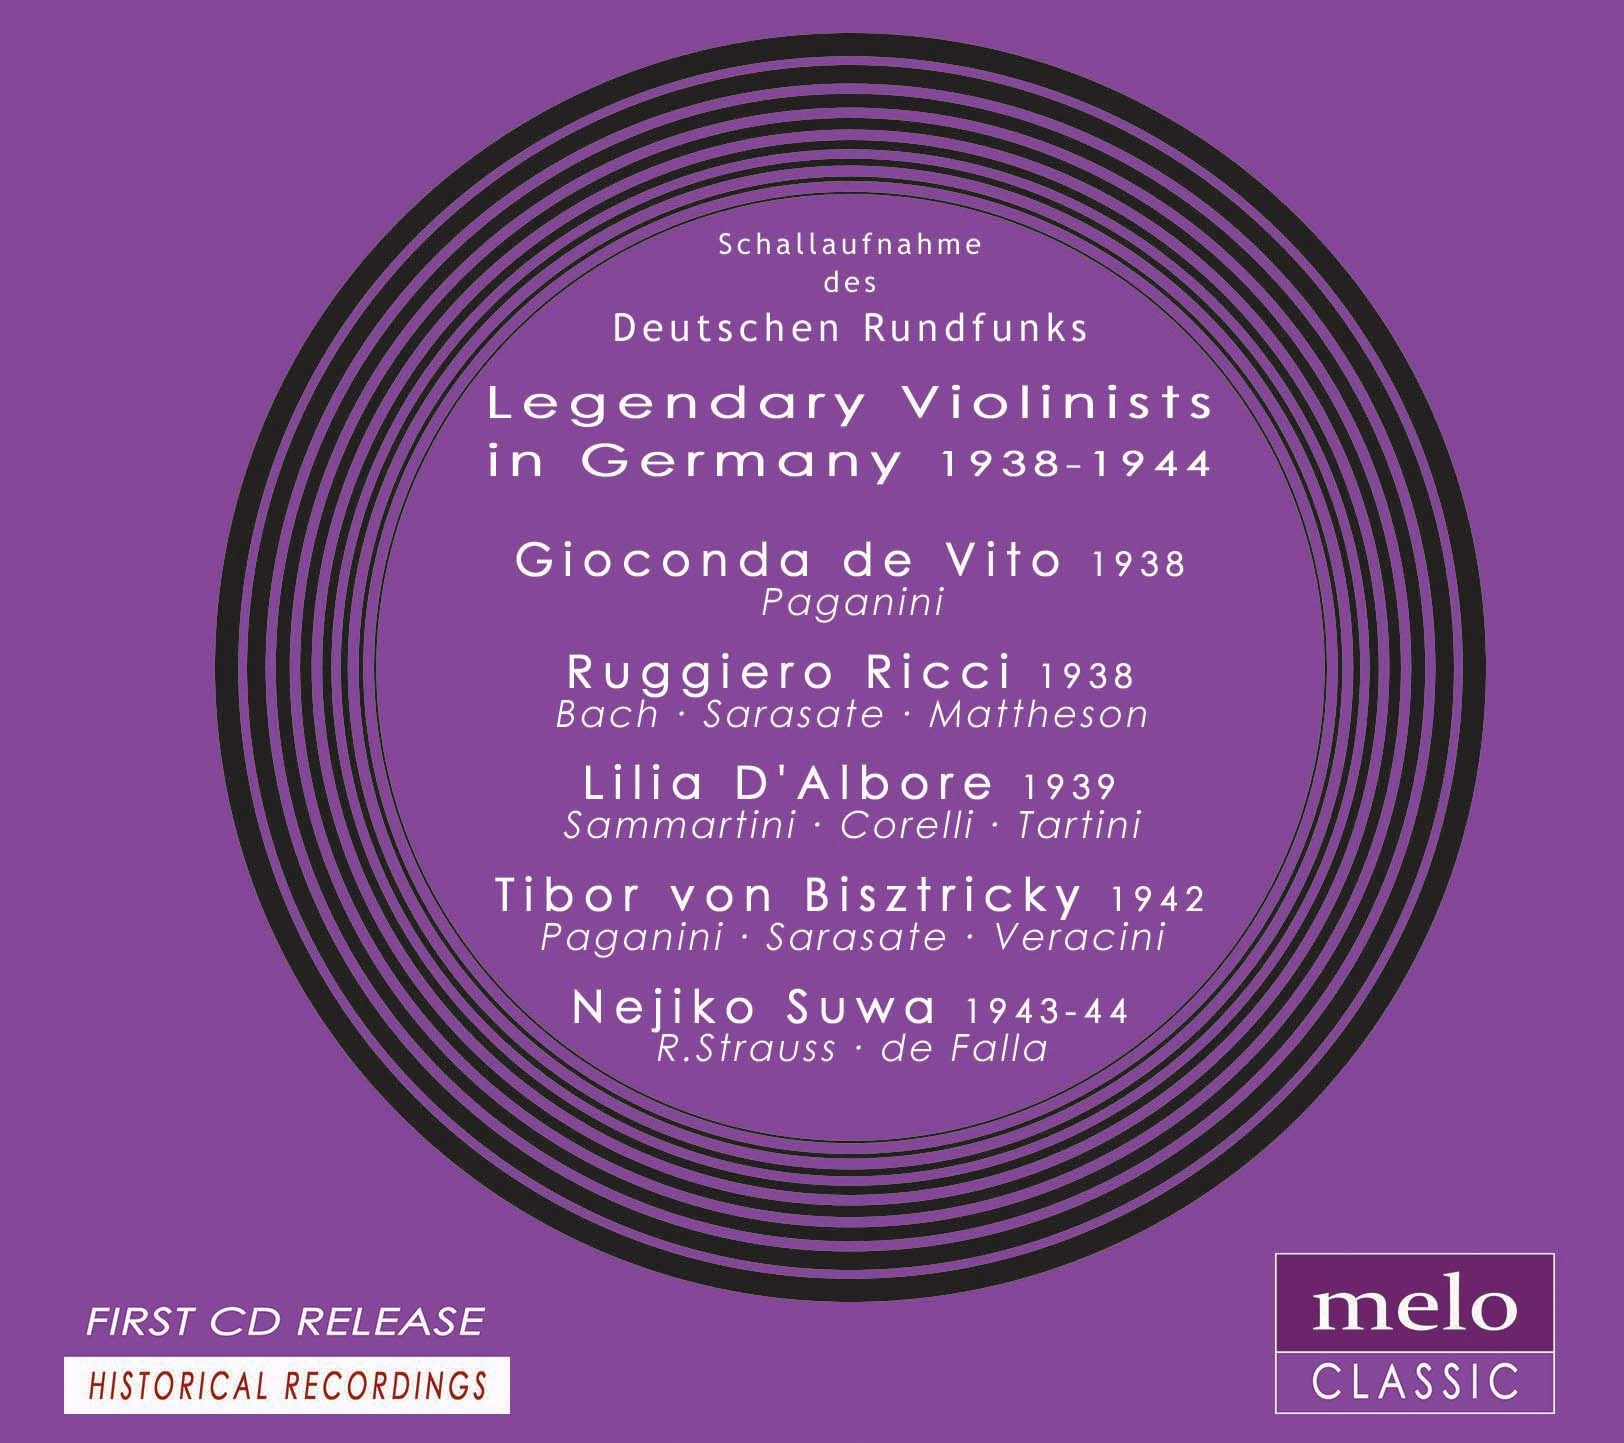 Legendary Violinists in Germany 1938-1944